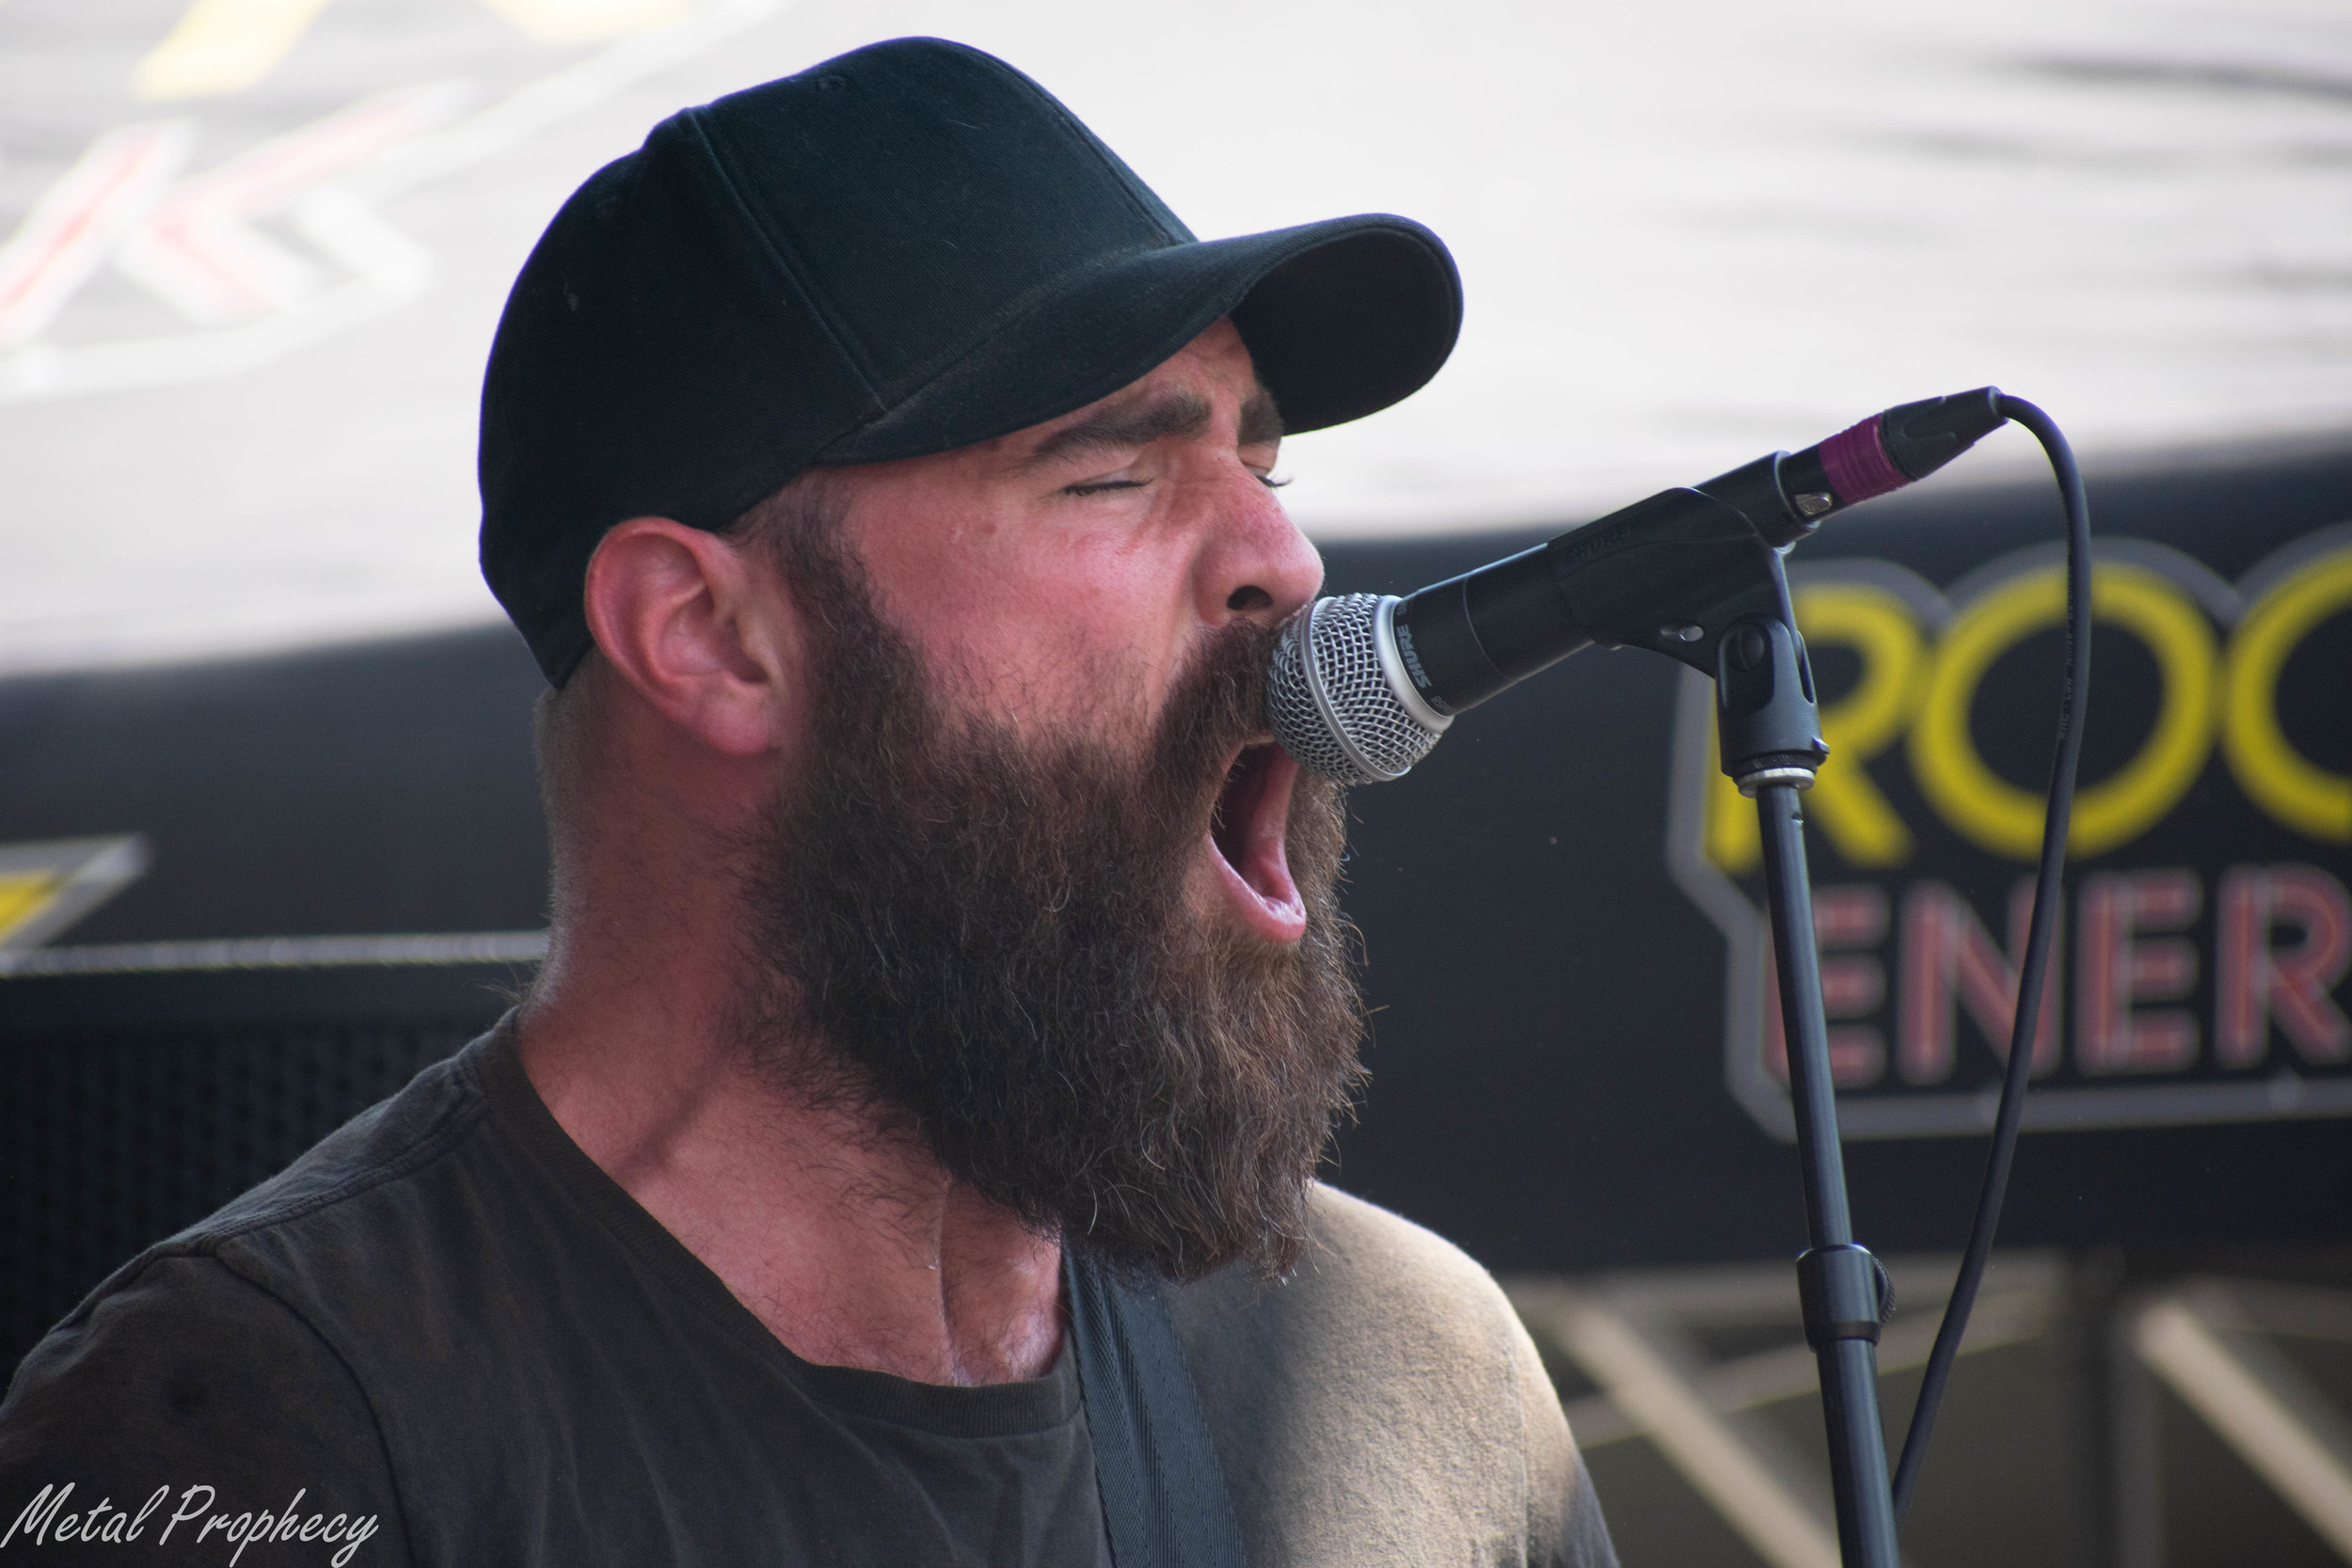 Four Year Strong at Rockstar Energy Disrupt Festival